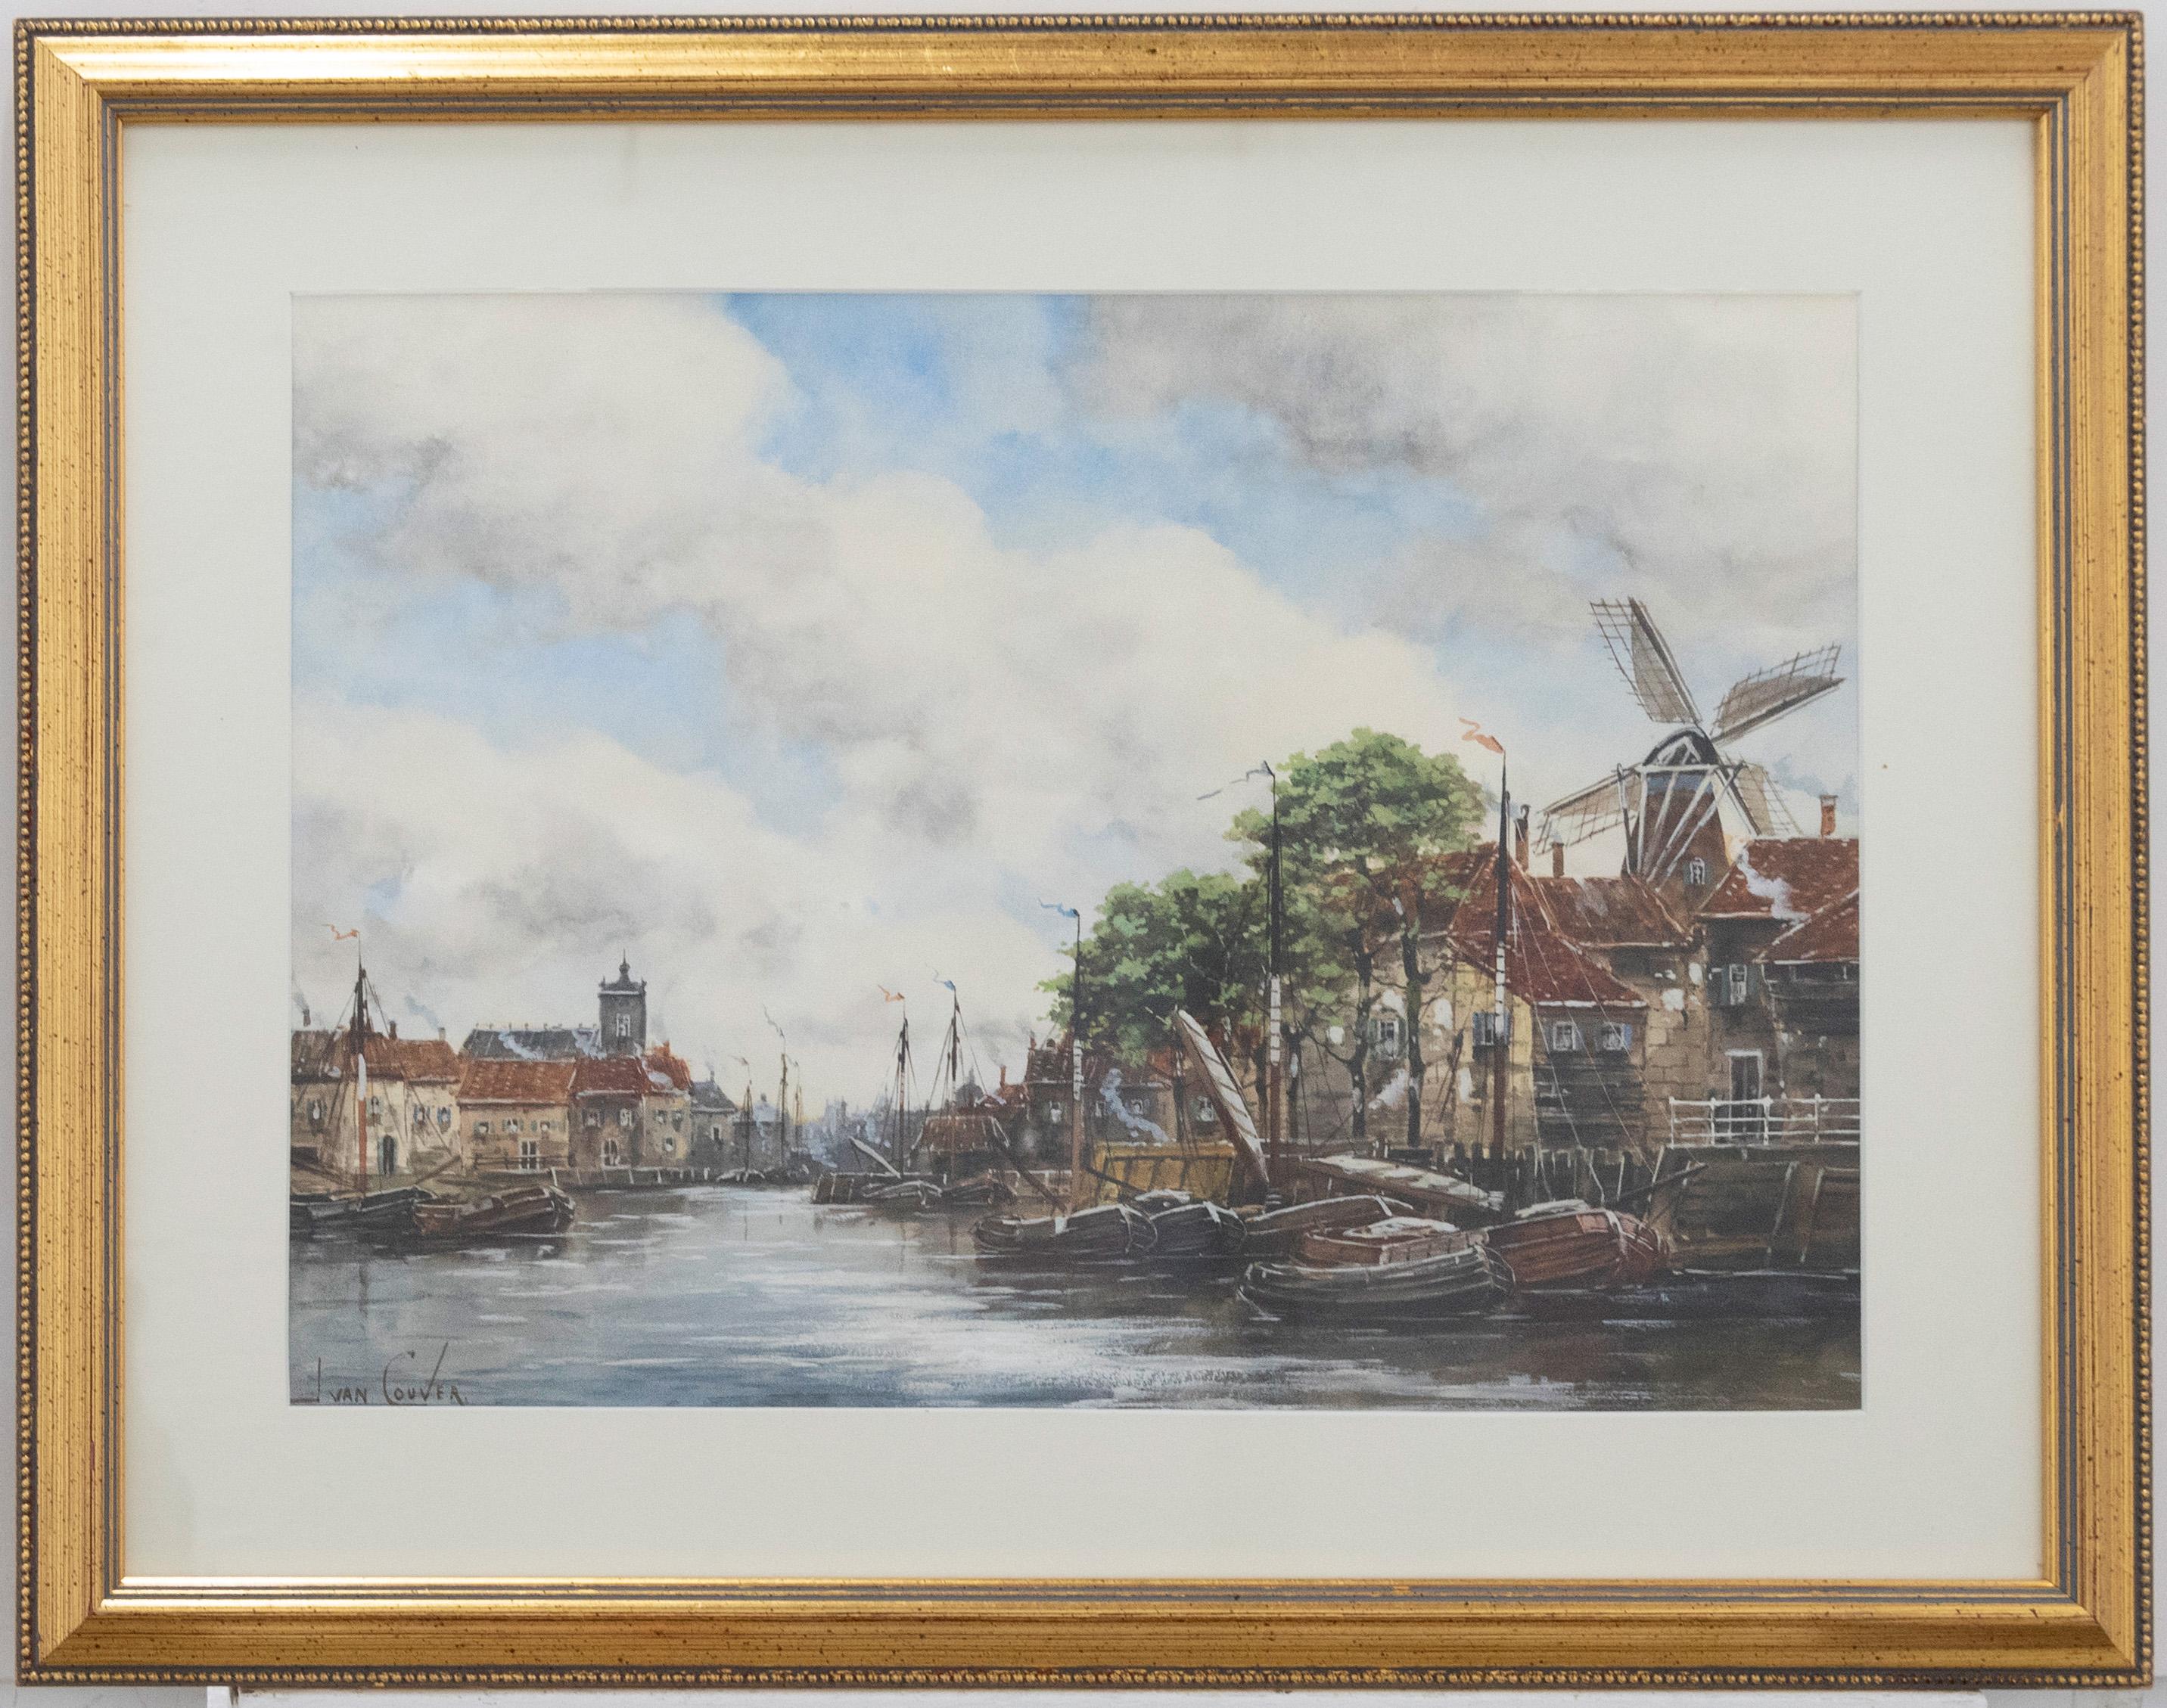 A charming late 19th Century watercolour depicting boats moored at a Dutch port. In the distance a windmill and the rooftops of the coastal town can be seen. Signed to the lower right. Presented in a gilt frame with a beaded running pattern. On